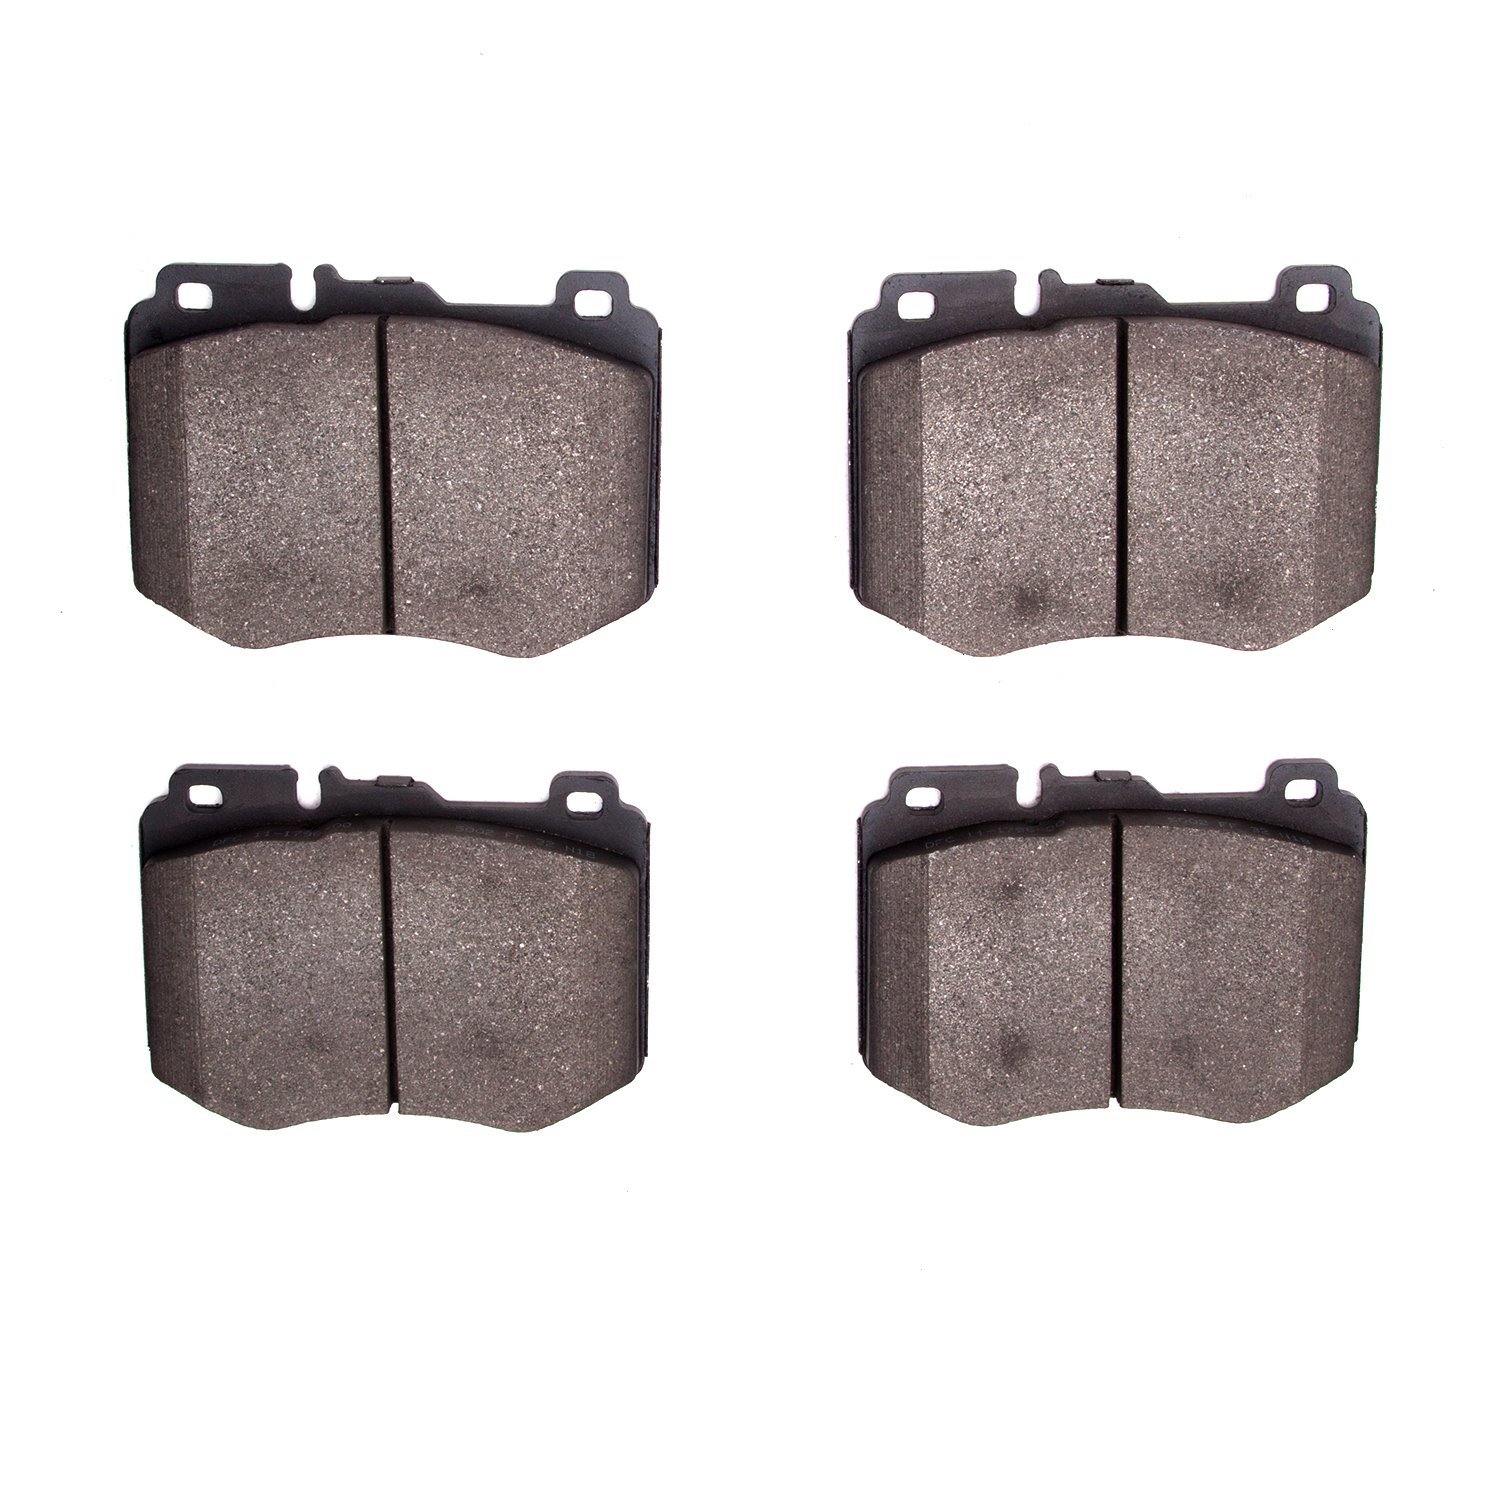 Euro Ceramic Brake Pads, Fits Select Mercedes-Benz, Position: Front